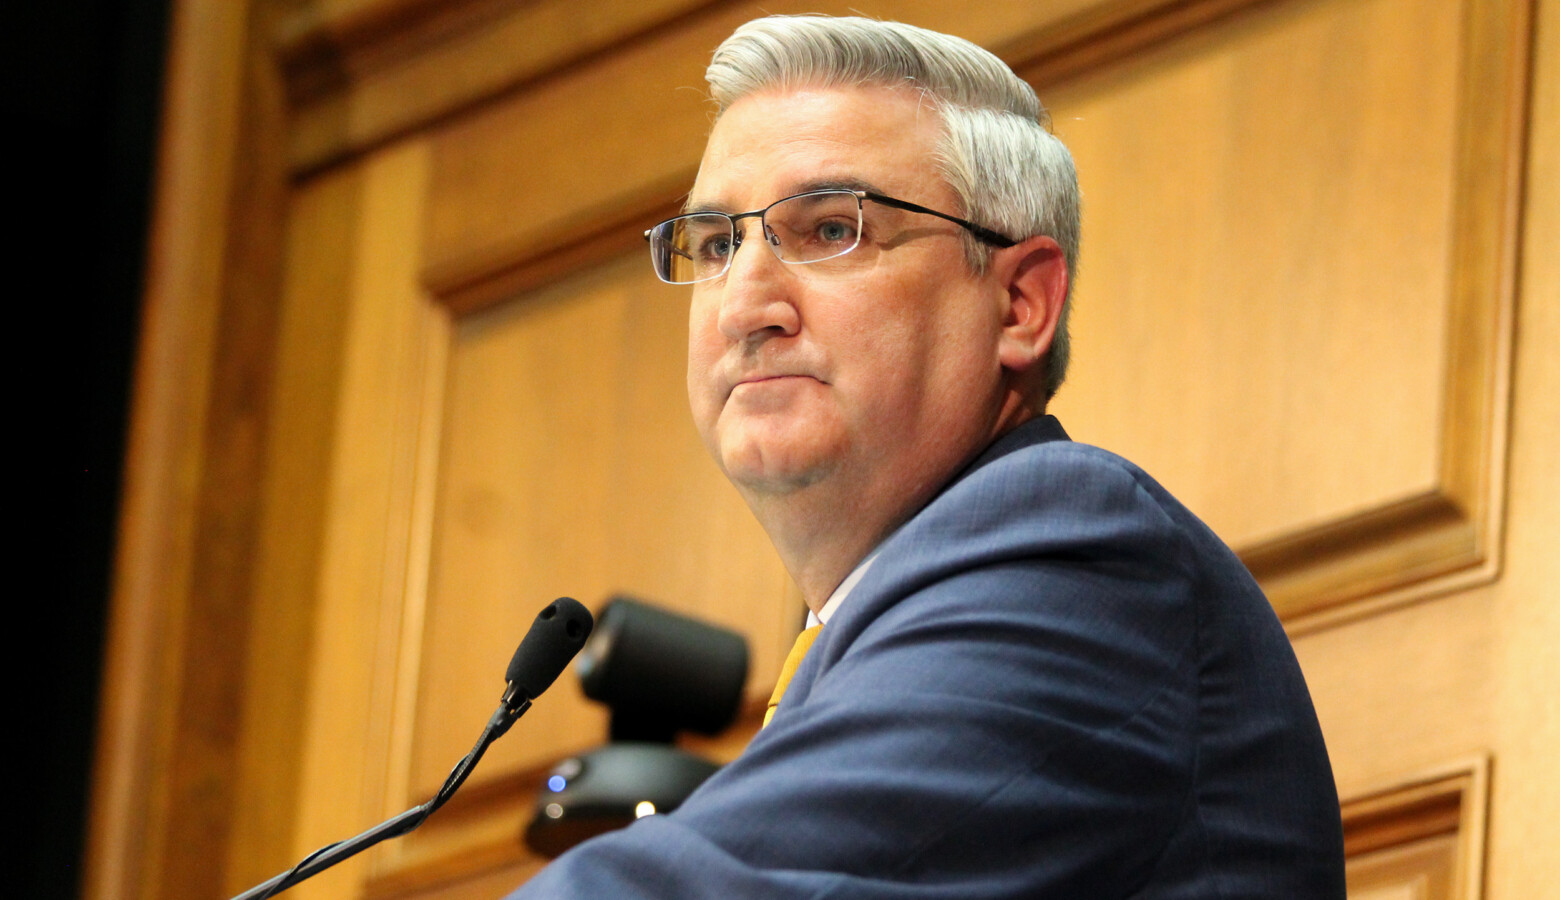 Questions are being asked whether Gov. Eric Holcomb is doing enough to ensure Hoosiers are protected from the coronavirus threat. (Lauren Chapman/IPB News)